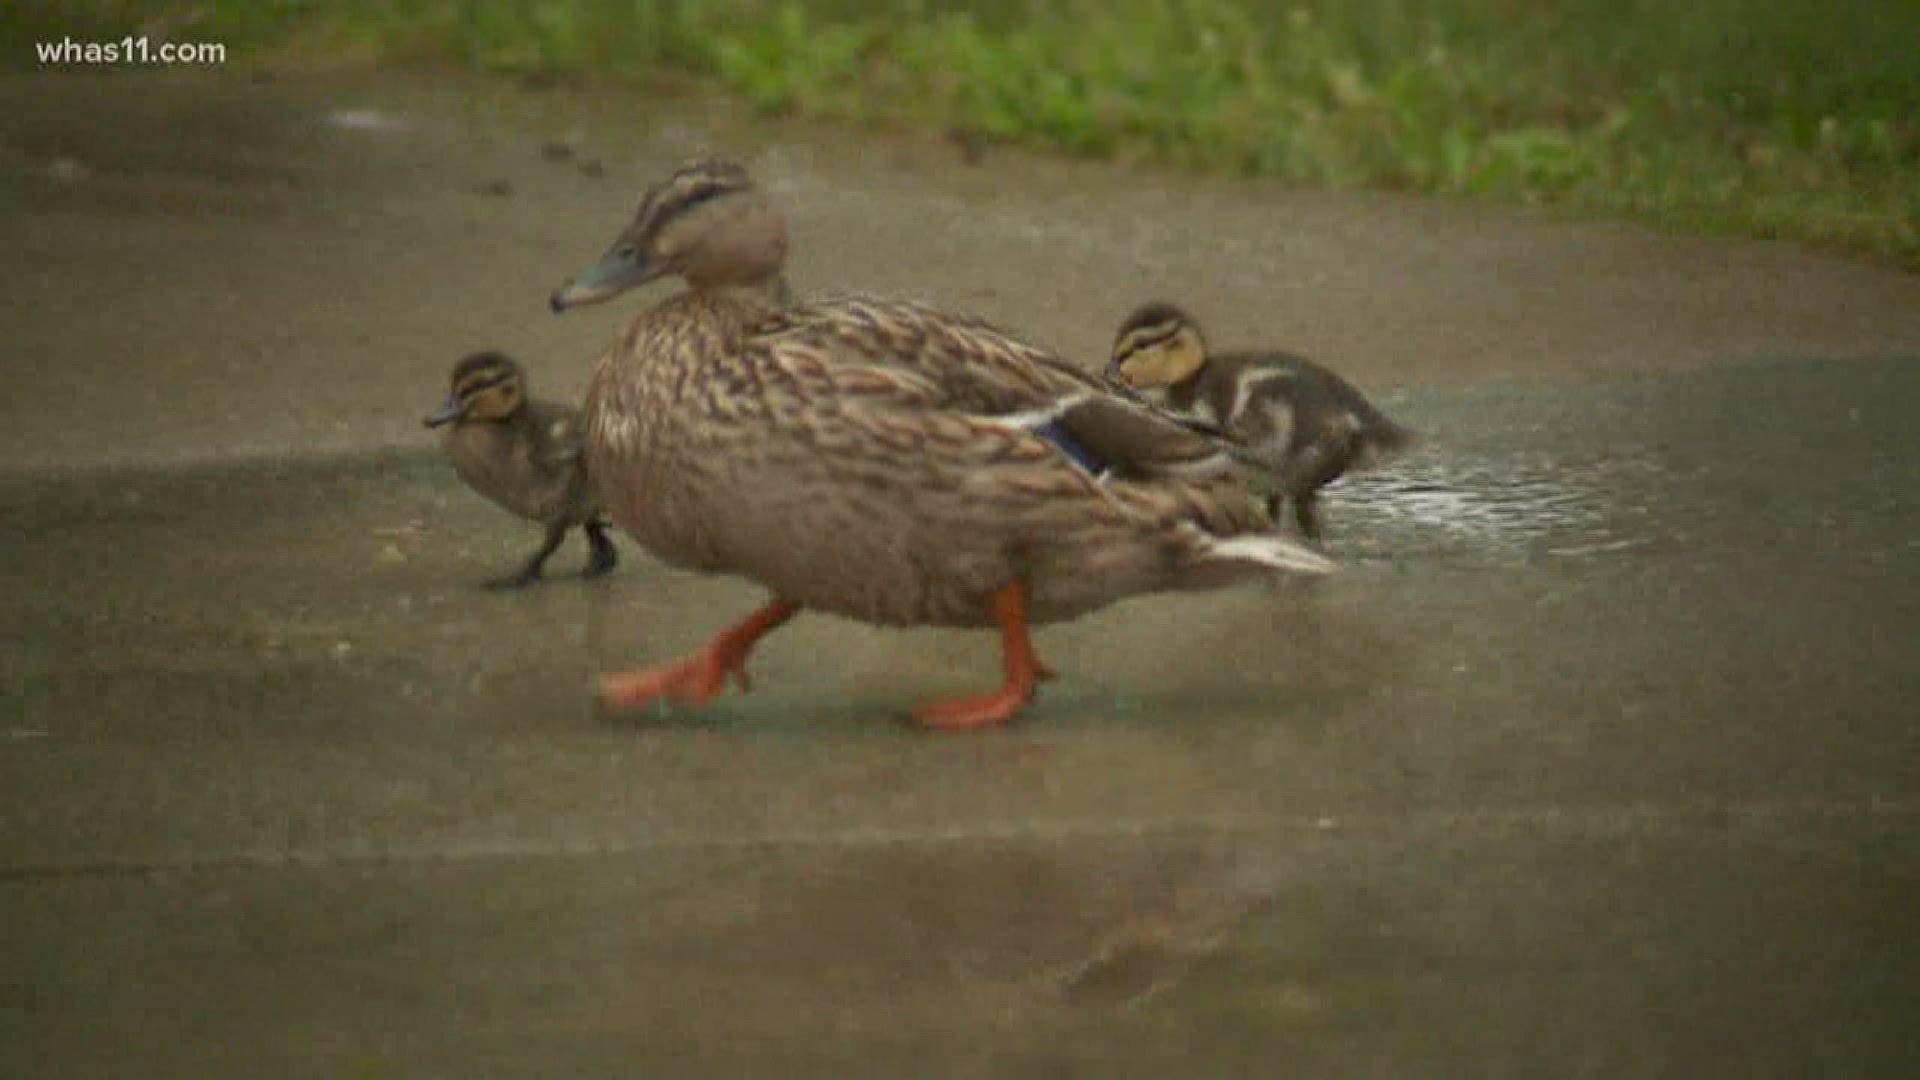 Photojournalist Jake Cannon shows ducklings enjoying the rain in New Albany.